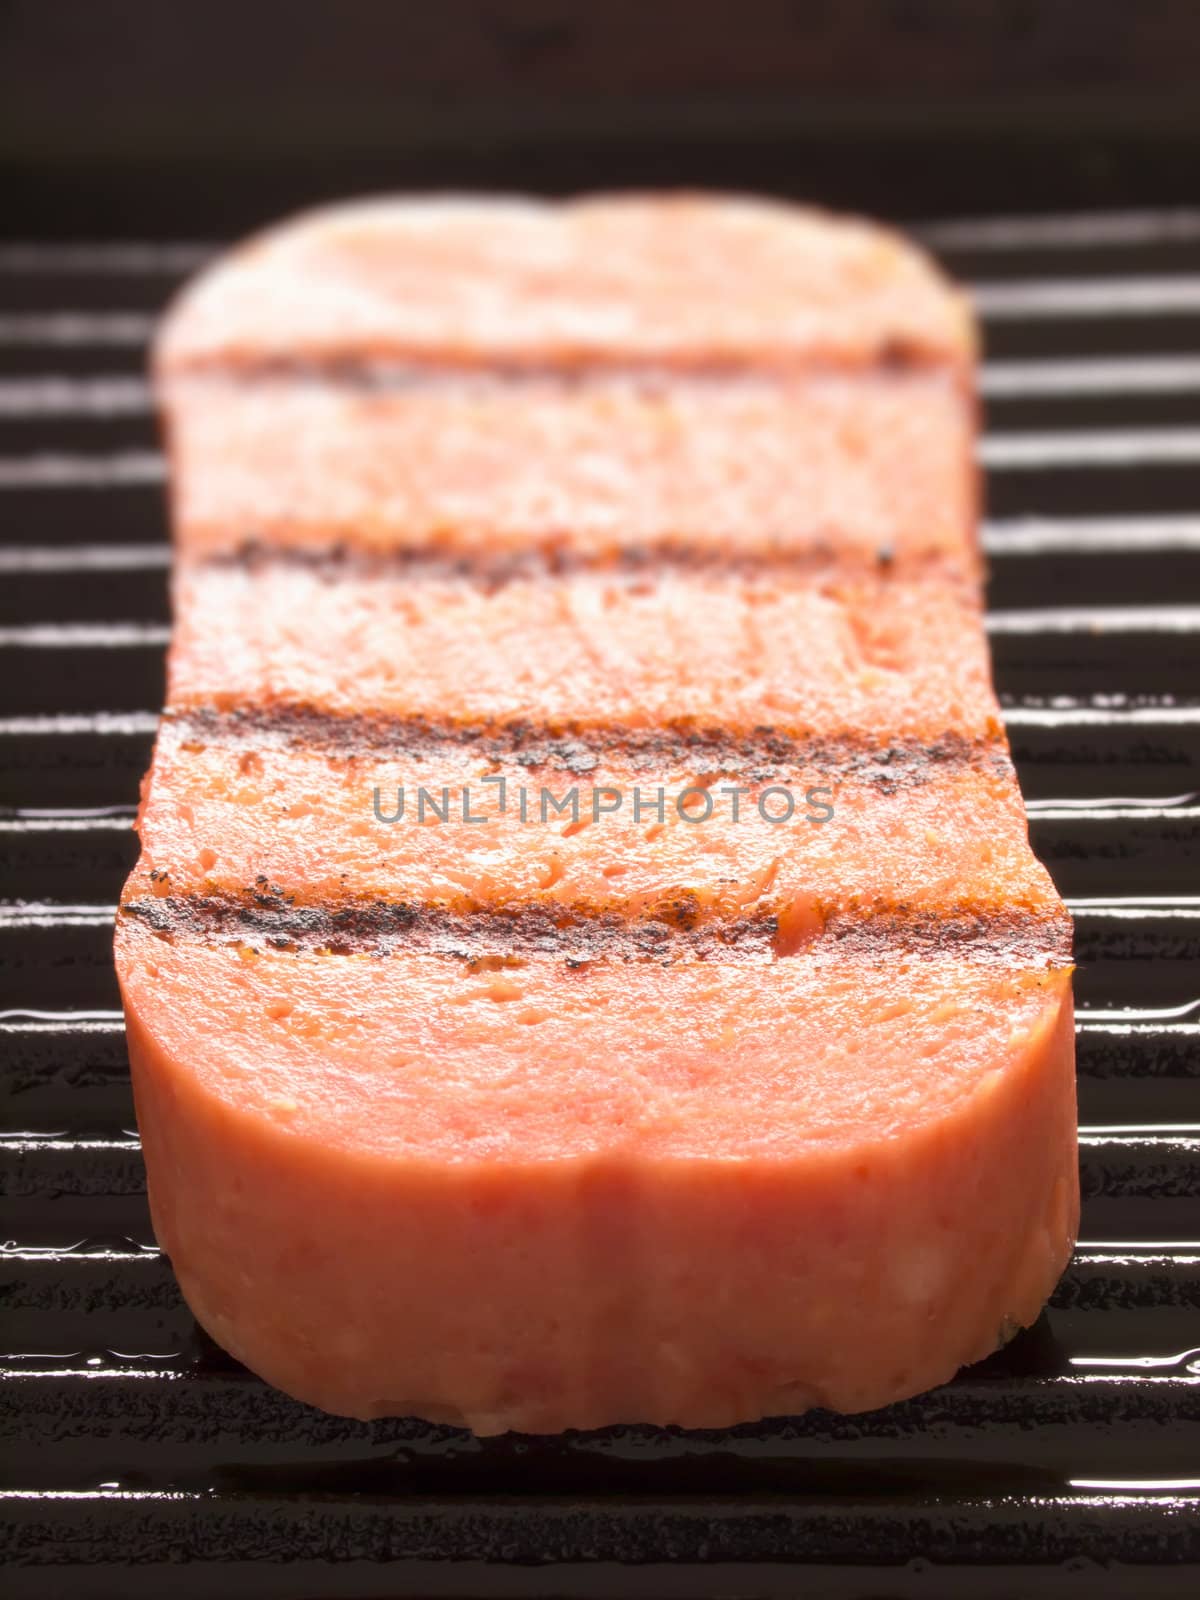 spam on a grill by zkruger